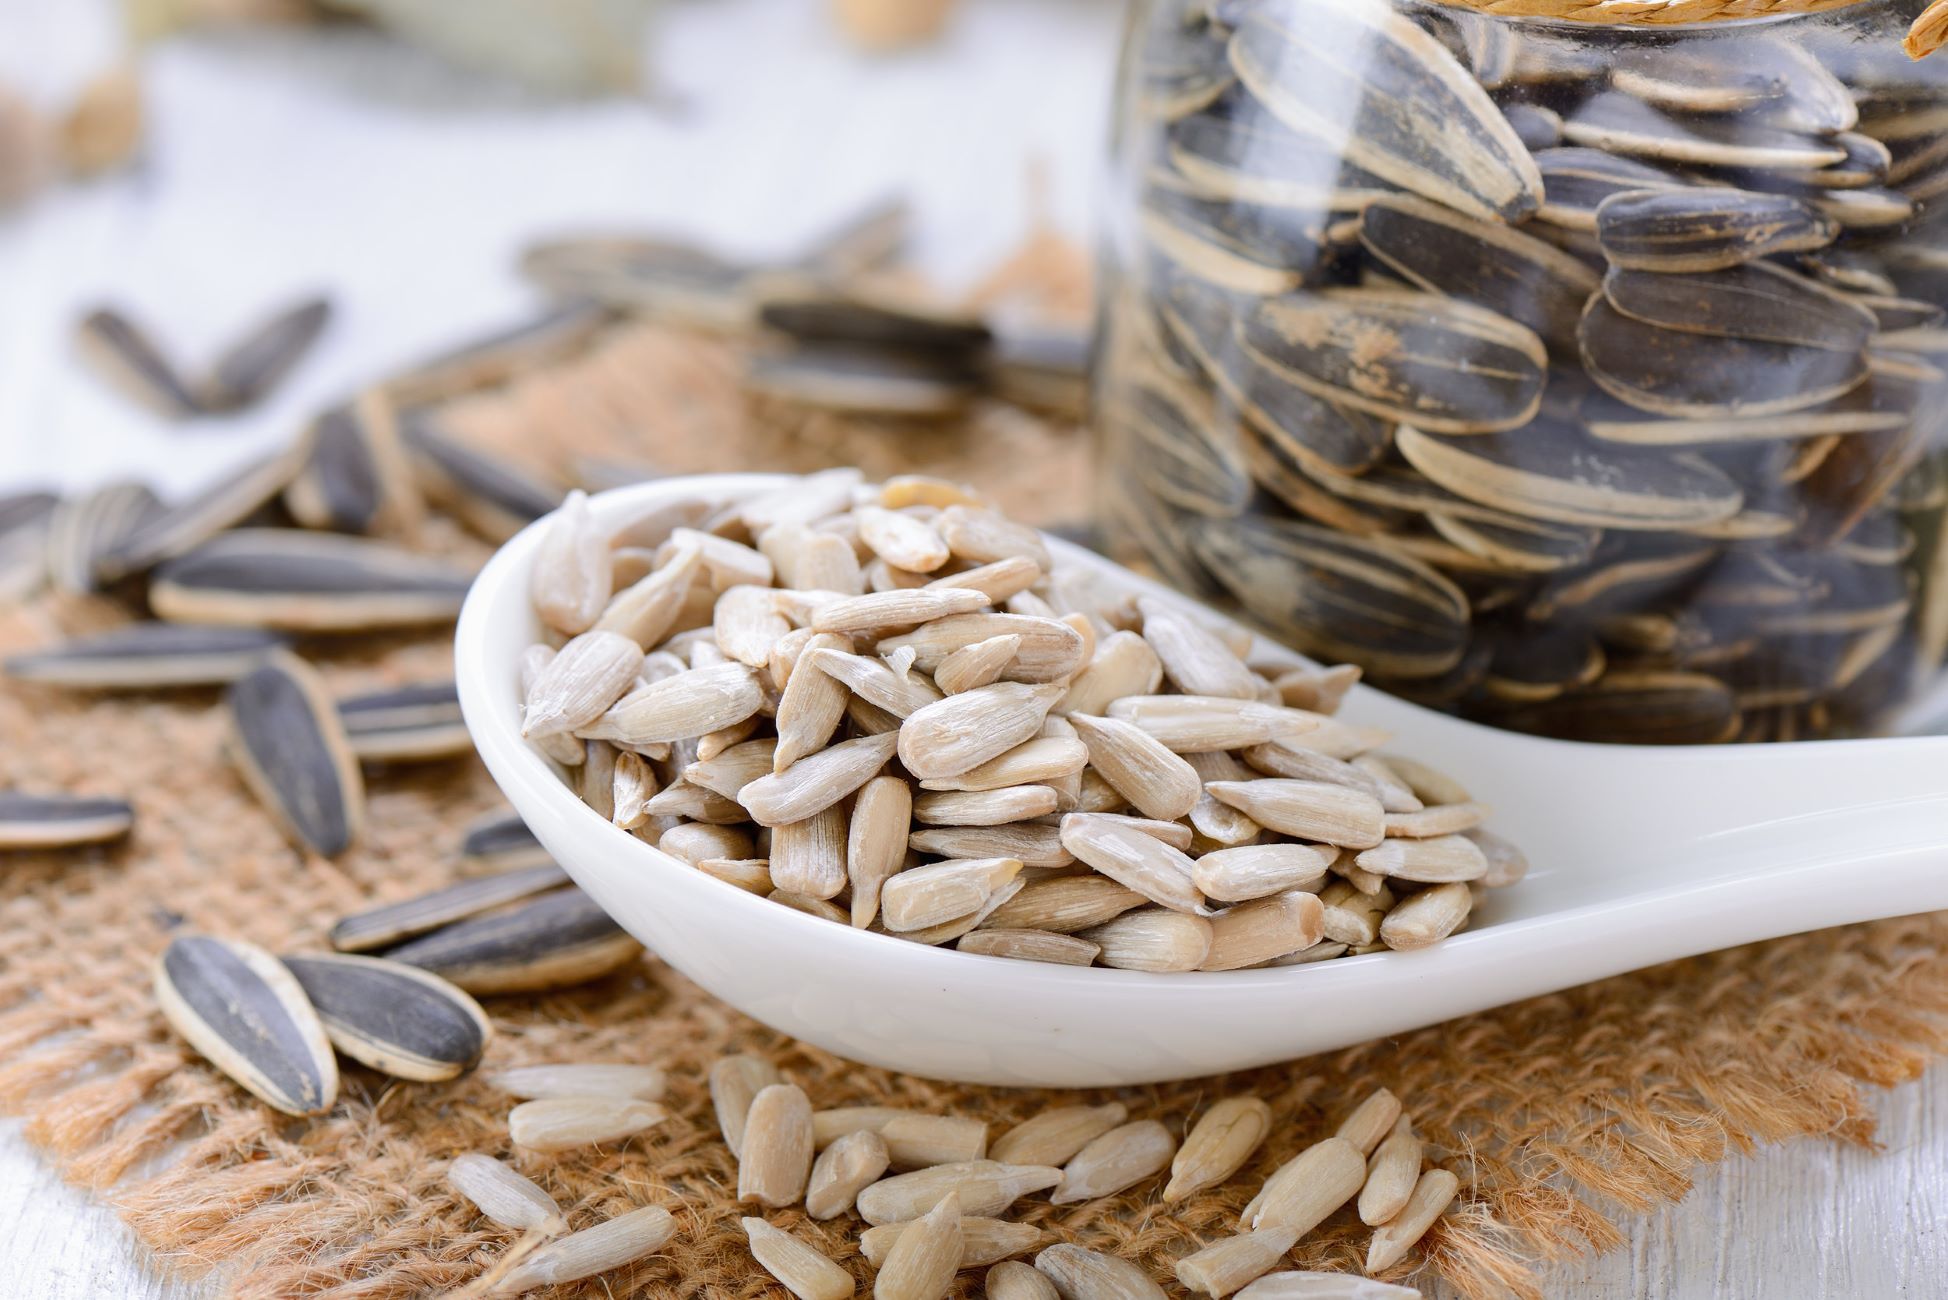 How To Eat Sunflower Seeds